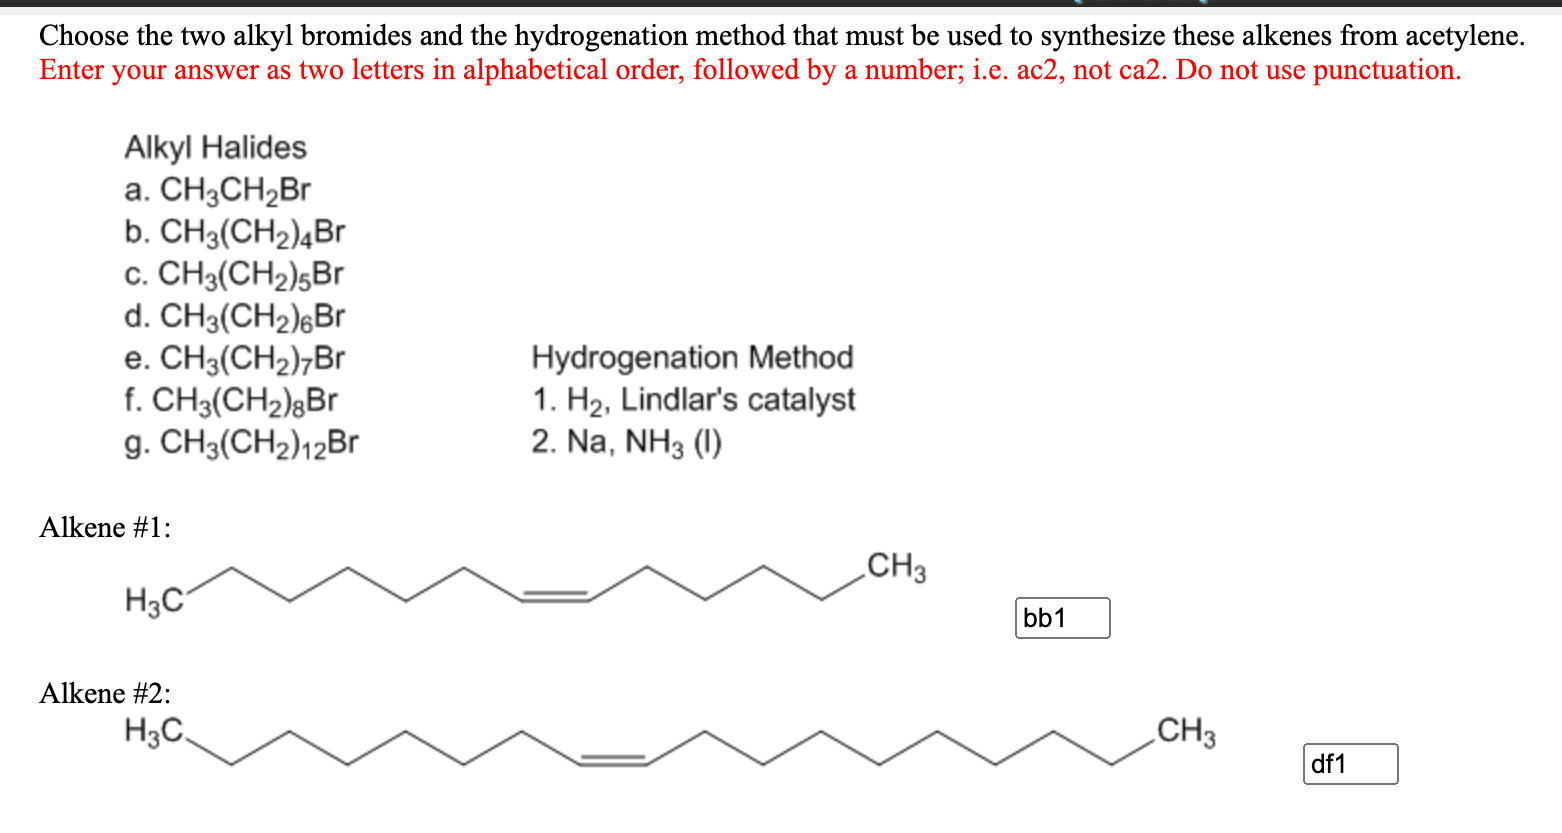 Choose the two alkyl bromides and the hydrogenation method that must be used to synthesize these alkenes from acetylene.
Enter your answer as two letters in alphabetical order, followed by a number; i.e. ac2, not ca2. Do not use punctuation.
Alkyl Halides
a. CH3CH2Br
b. CH3(CH2)4Br
c. CH3(CH2)5Br
d. CH3(CH2)¿Br
e. CH3(CH2)¬Br
f. CH3(CH2)gBr
g. CH3(CH2)12Br
Hydrogenation Method
1. H2, Lindlar's catalyst
2. Na, NH3 (I)
Alkene #1:
CH3
H3C
bb1
Alkene #2:
H3C.
CH3
df1
